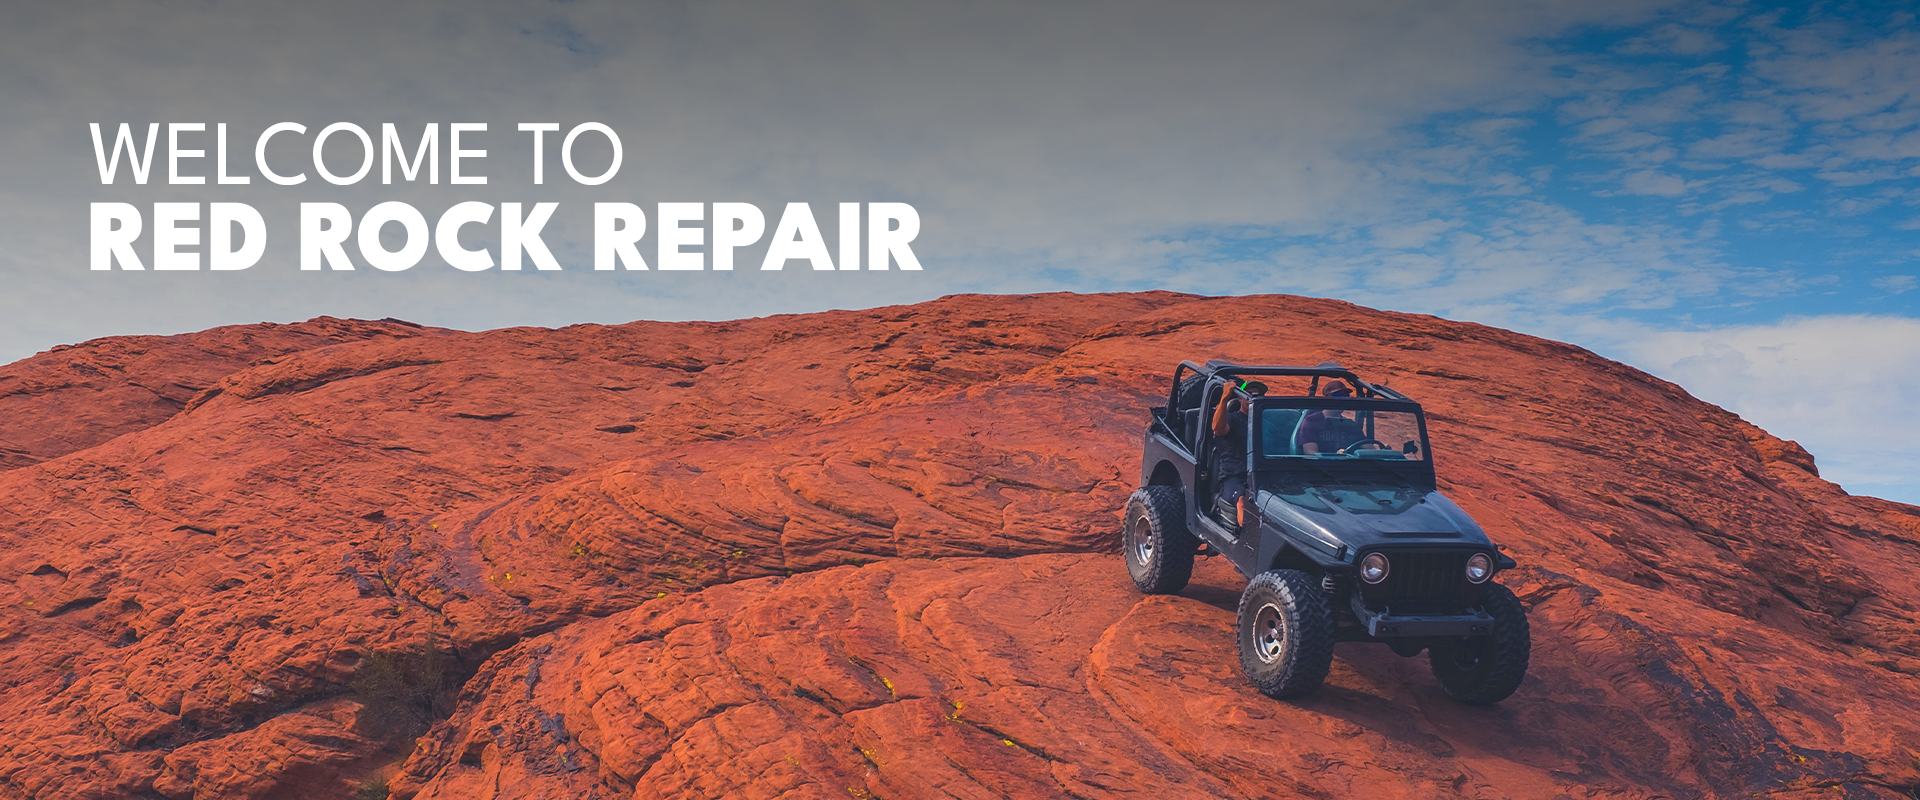 Welcome to Red Rock Repair